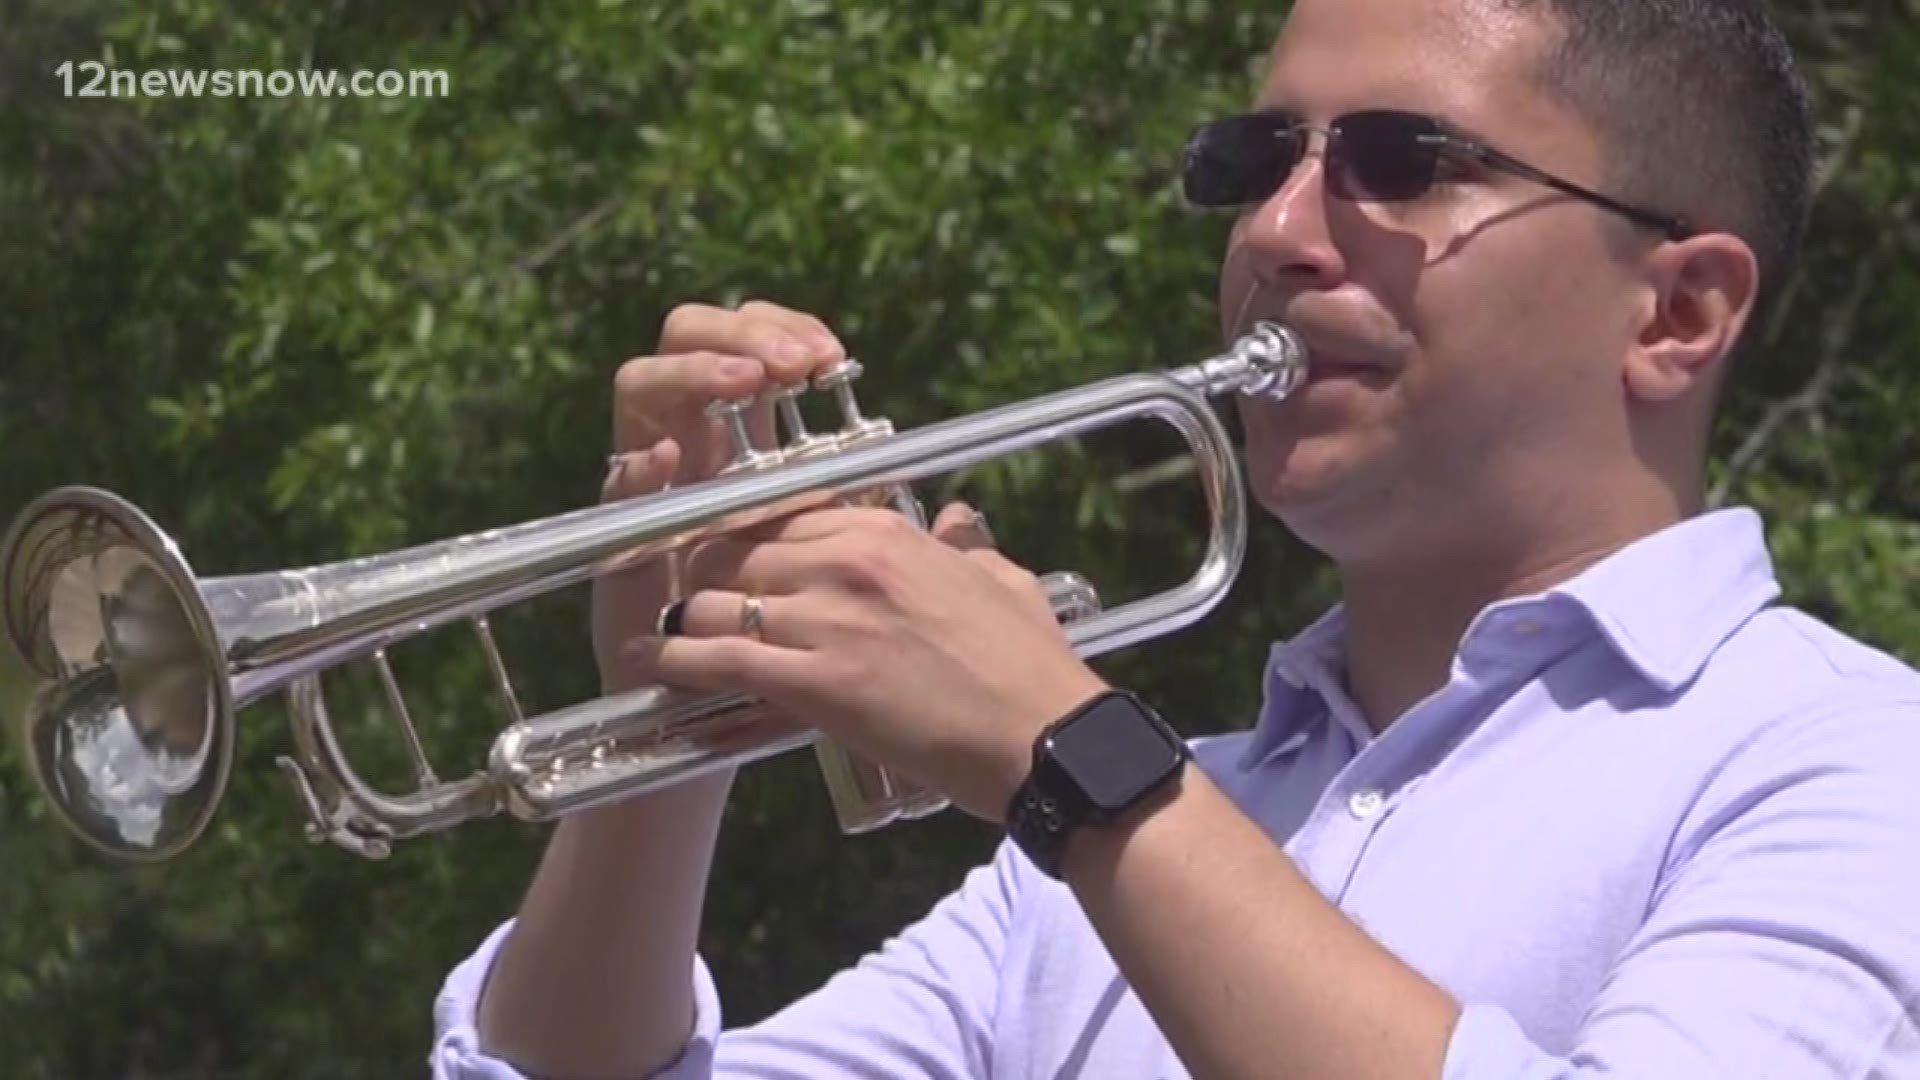 He says he is glad to be healthy to play his trumpet to honor those who are remembered on Memorial Day